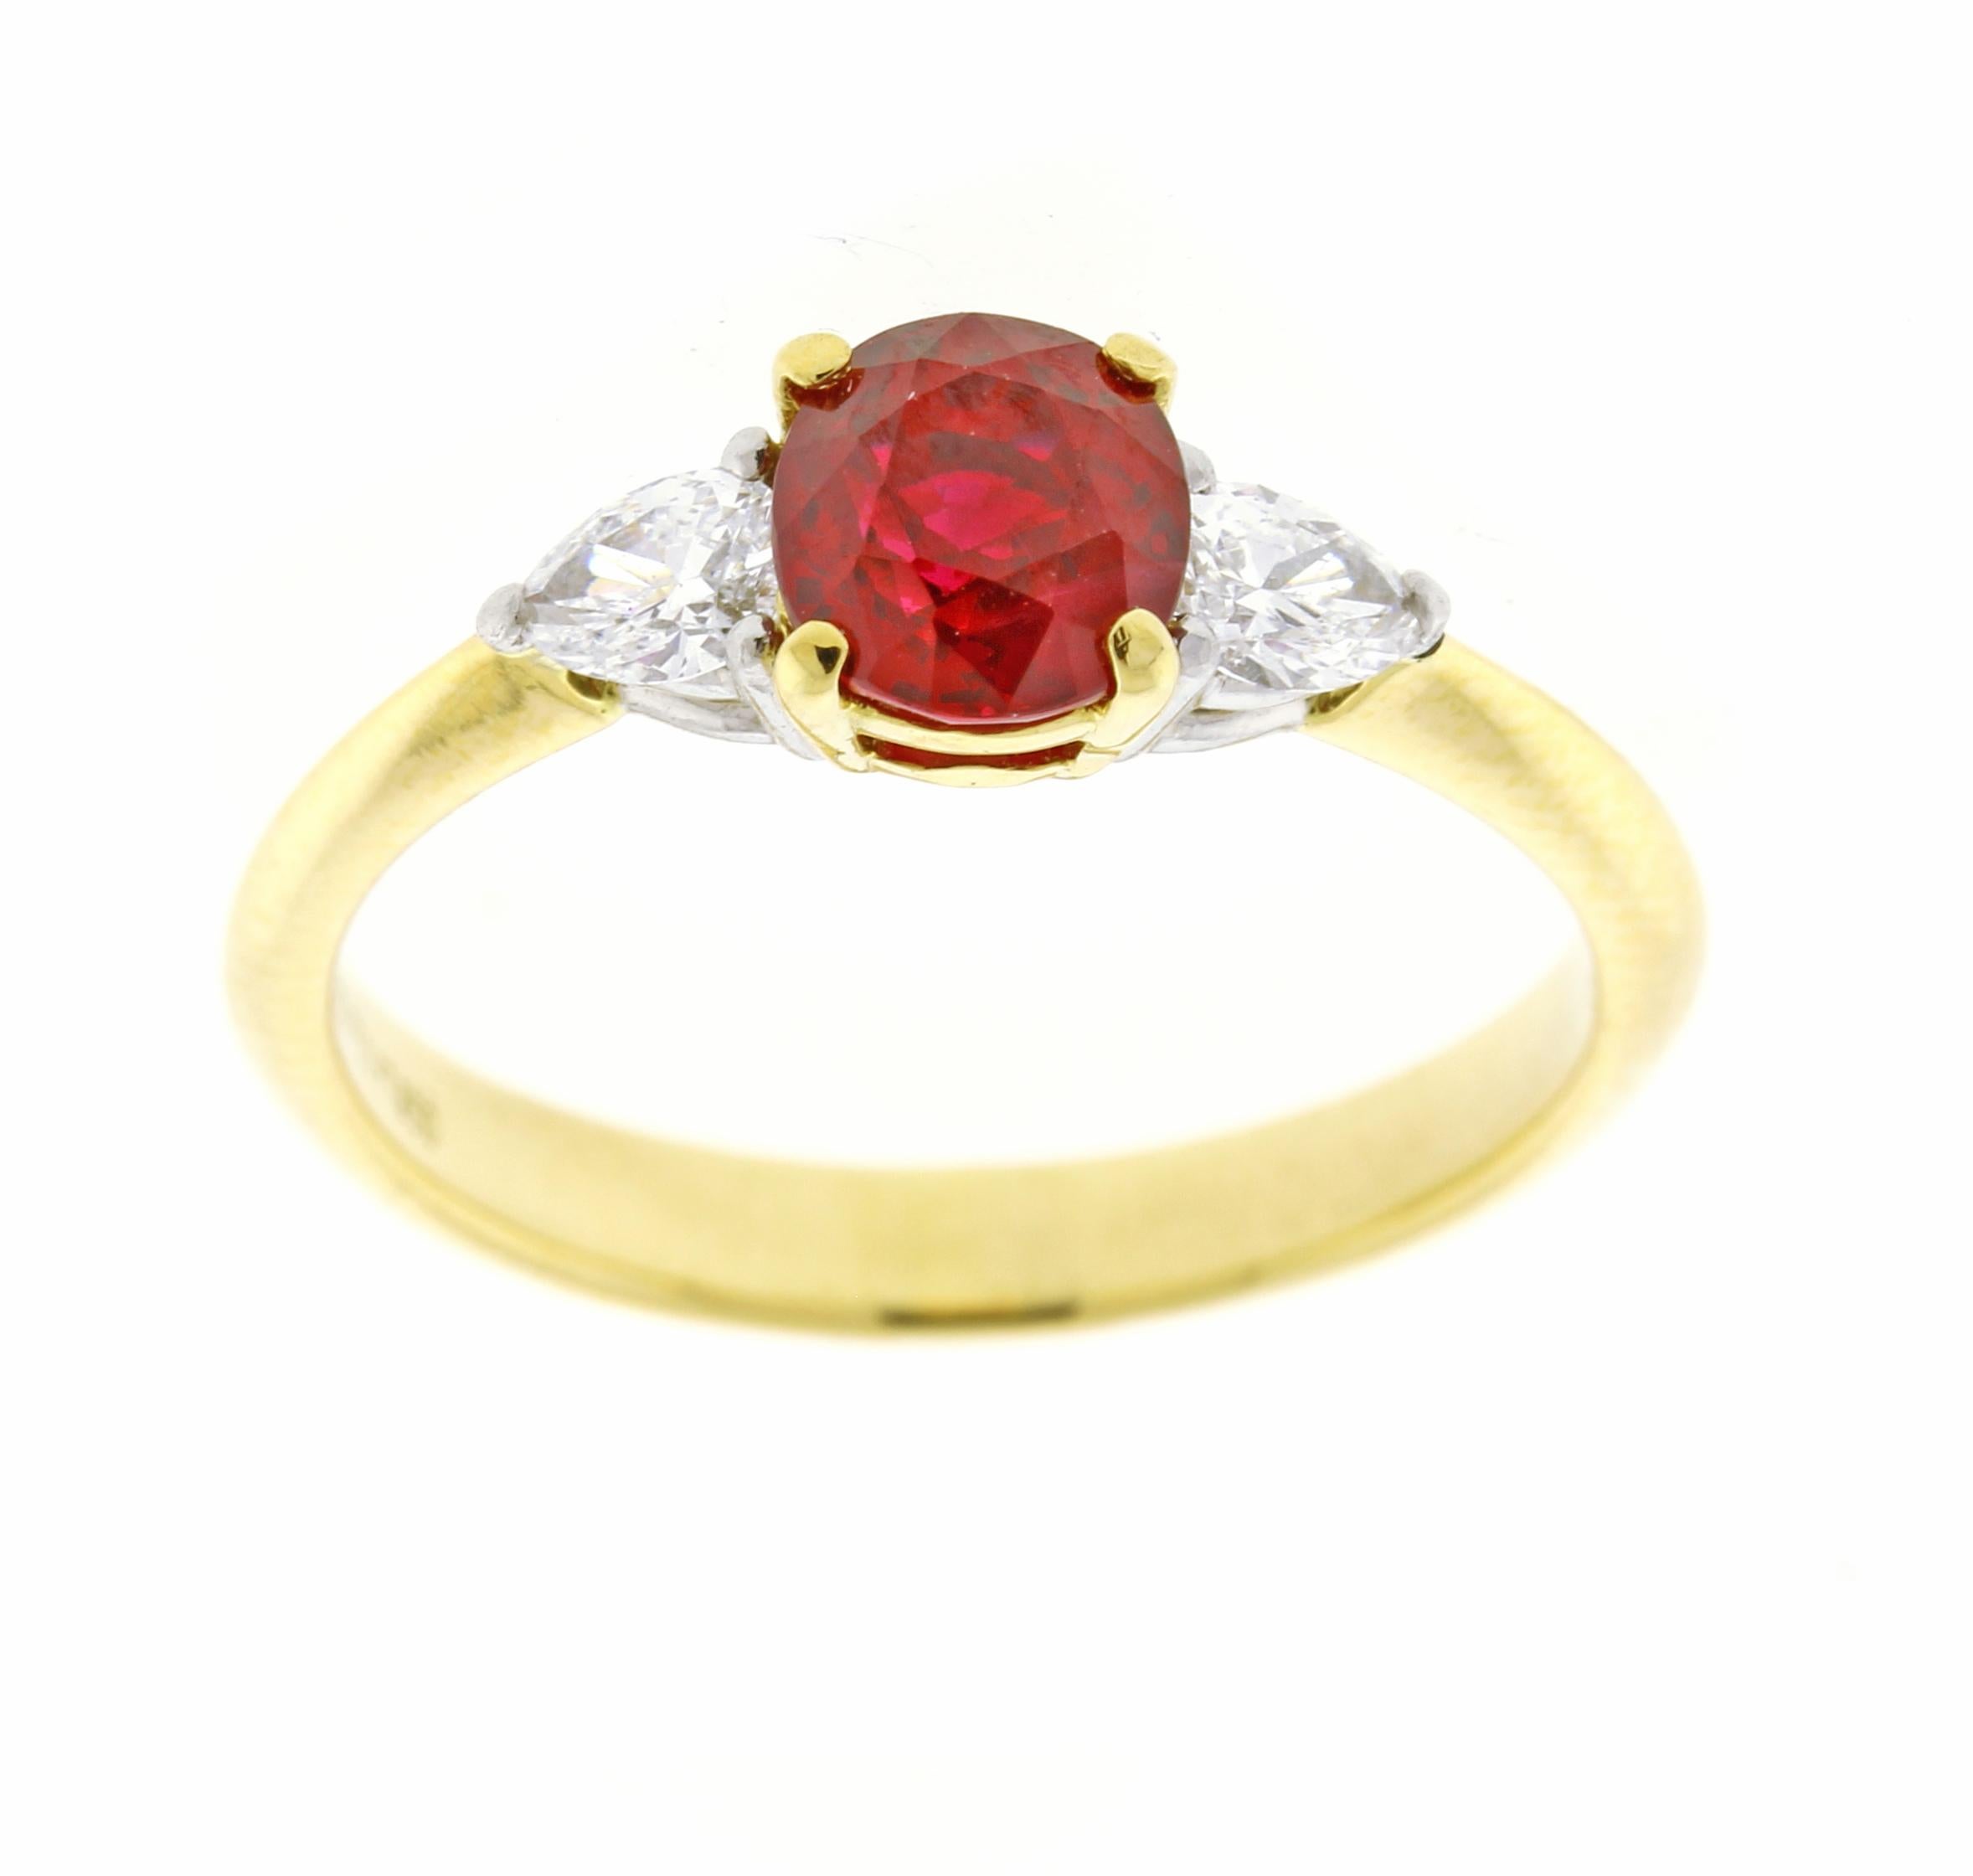 From Tiffany & Co. a Vivid red ruby and pear shape diamond ring.
♦ Designer: Tiffany & Co
♦ Metal: 18 karat and platinum
♦ Oval Heated Burma Ruby=1.02 carats
♦ 2 Diamonds=.23
♦ Circa 1990
♦ Size 6, Resizable
♦ Packaging: Tiffany Box
♦ Condition: